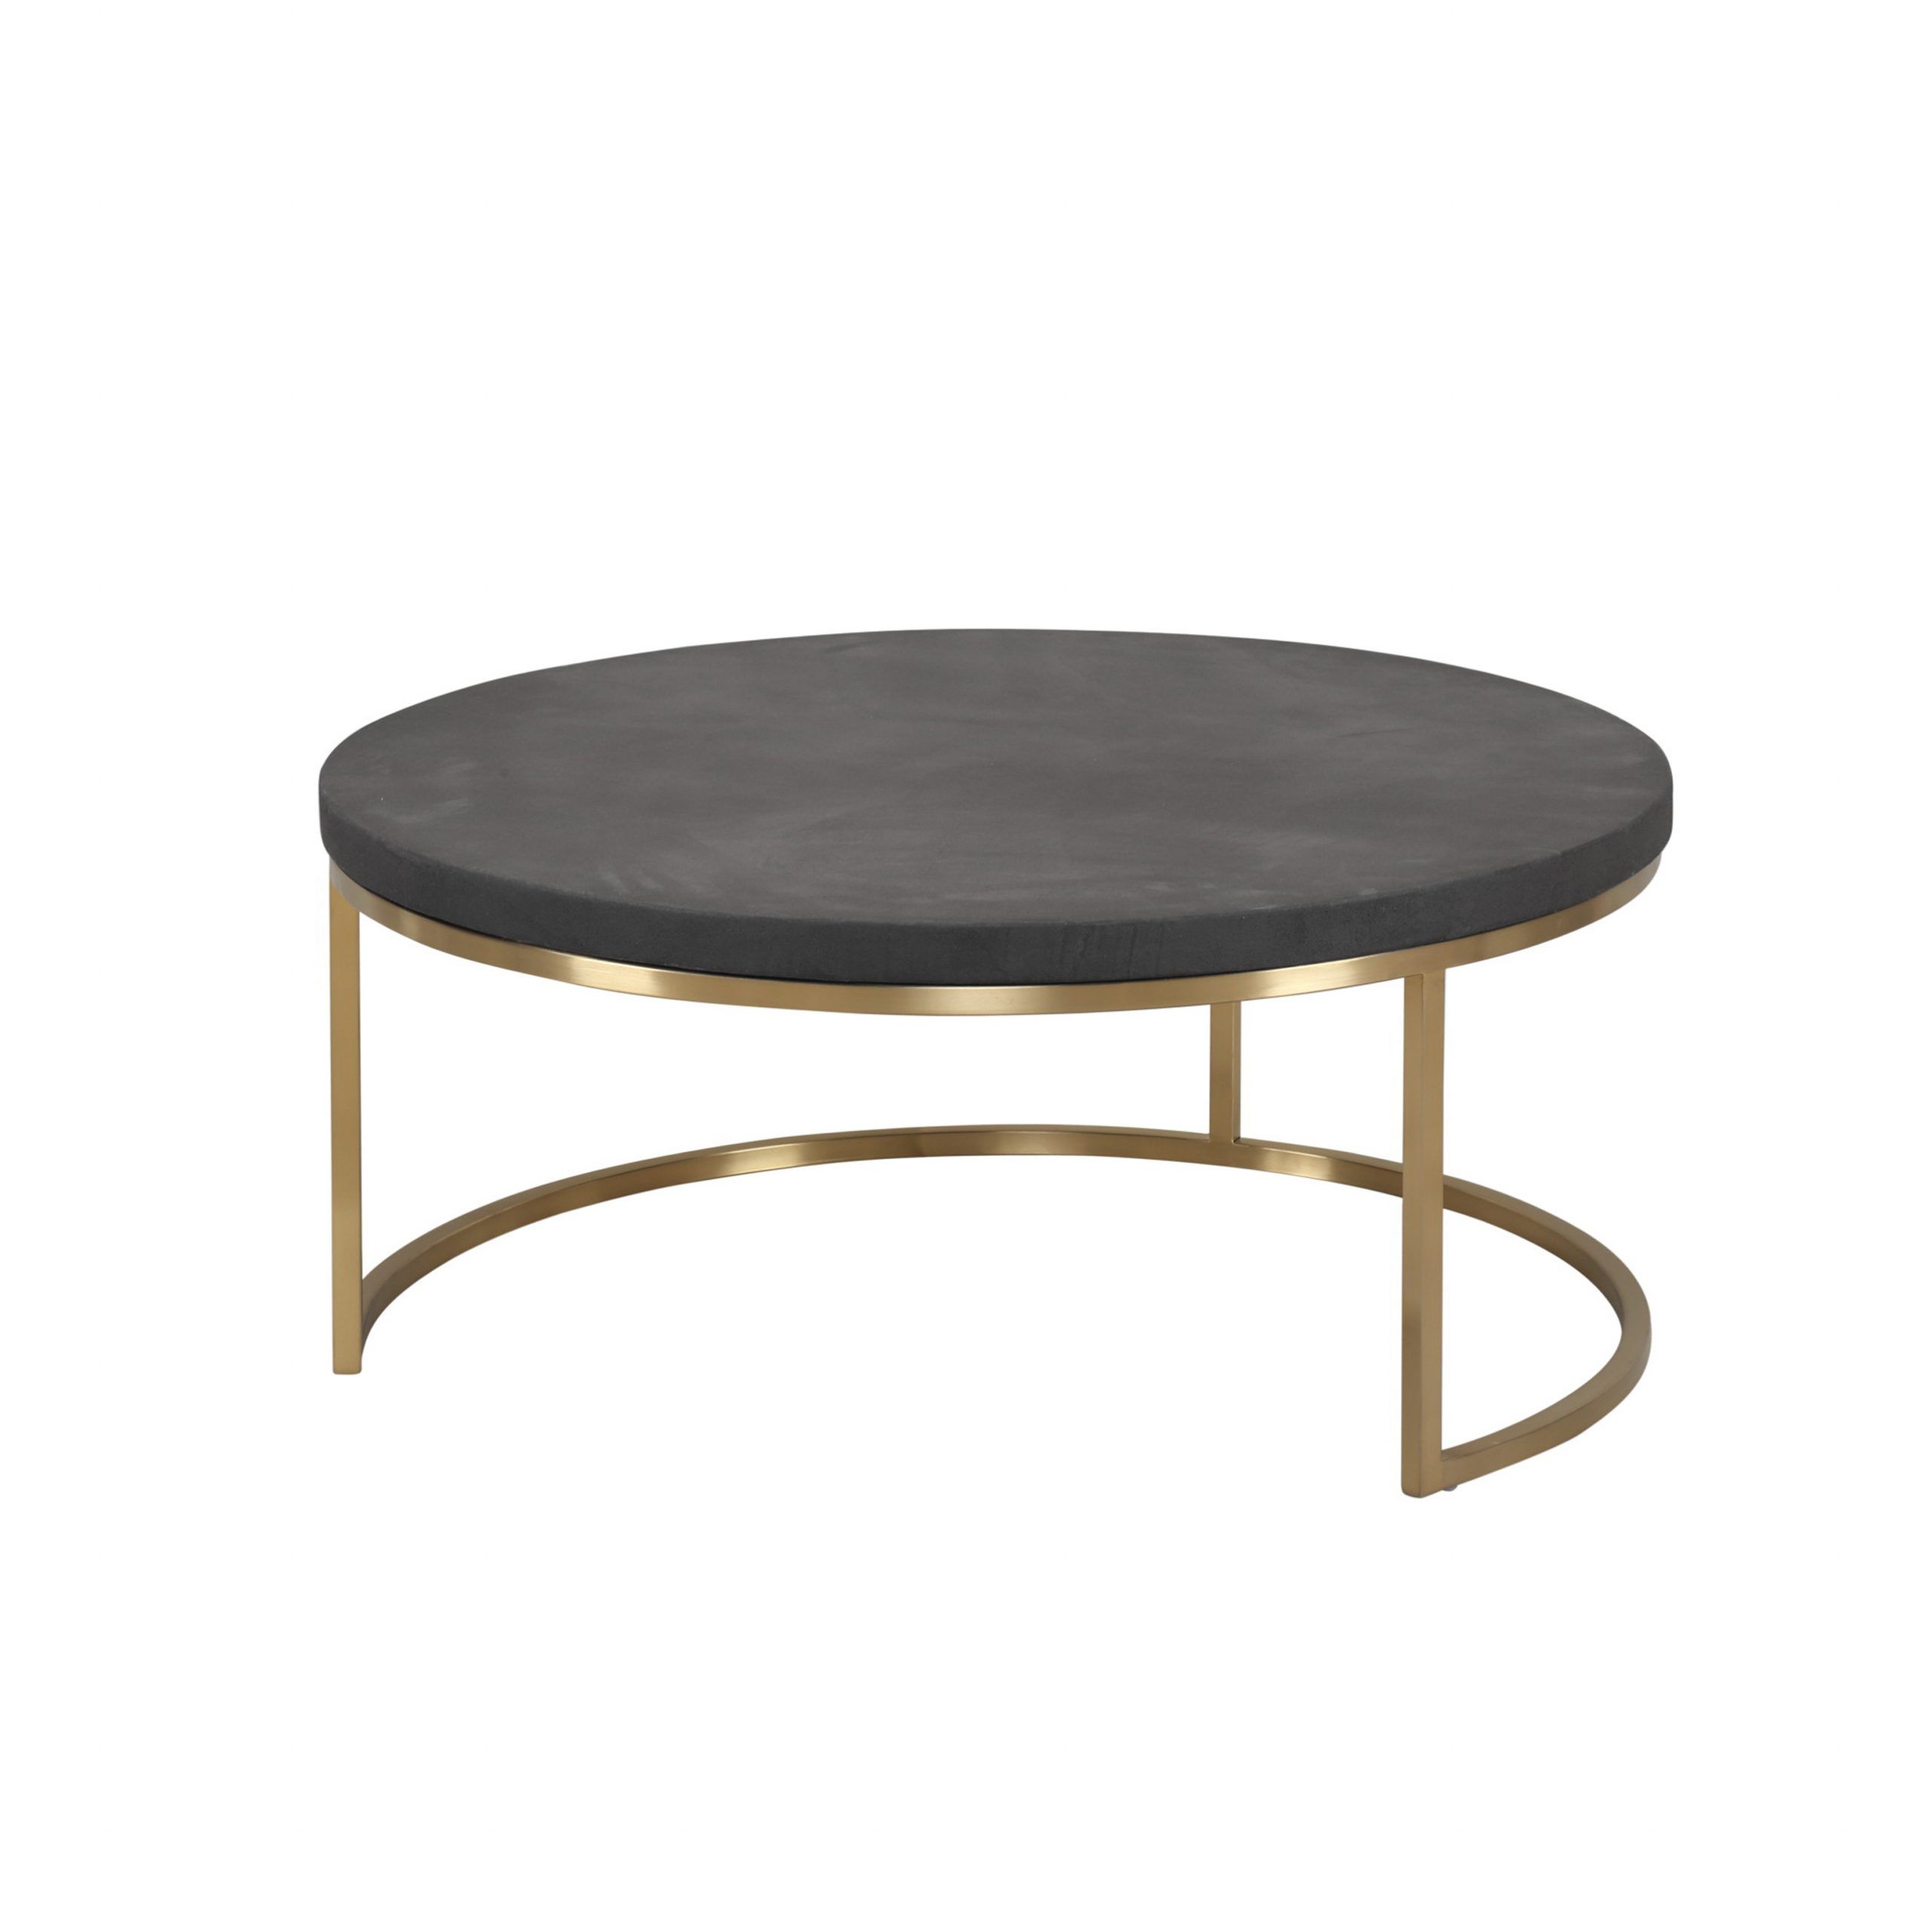 Deco 35" Round Coffee Table Black Concrete Laminate With For Popular Square Black And Brushed Gold Coffee Tables (Gallery 9 of 20)